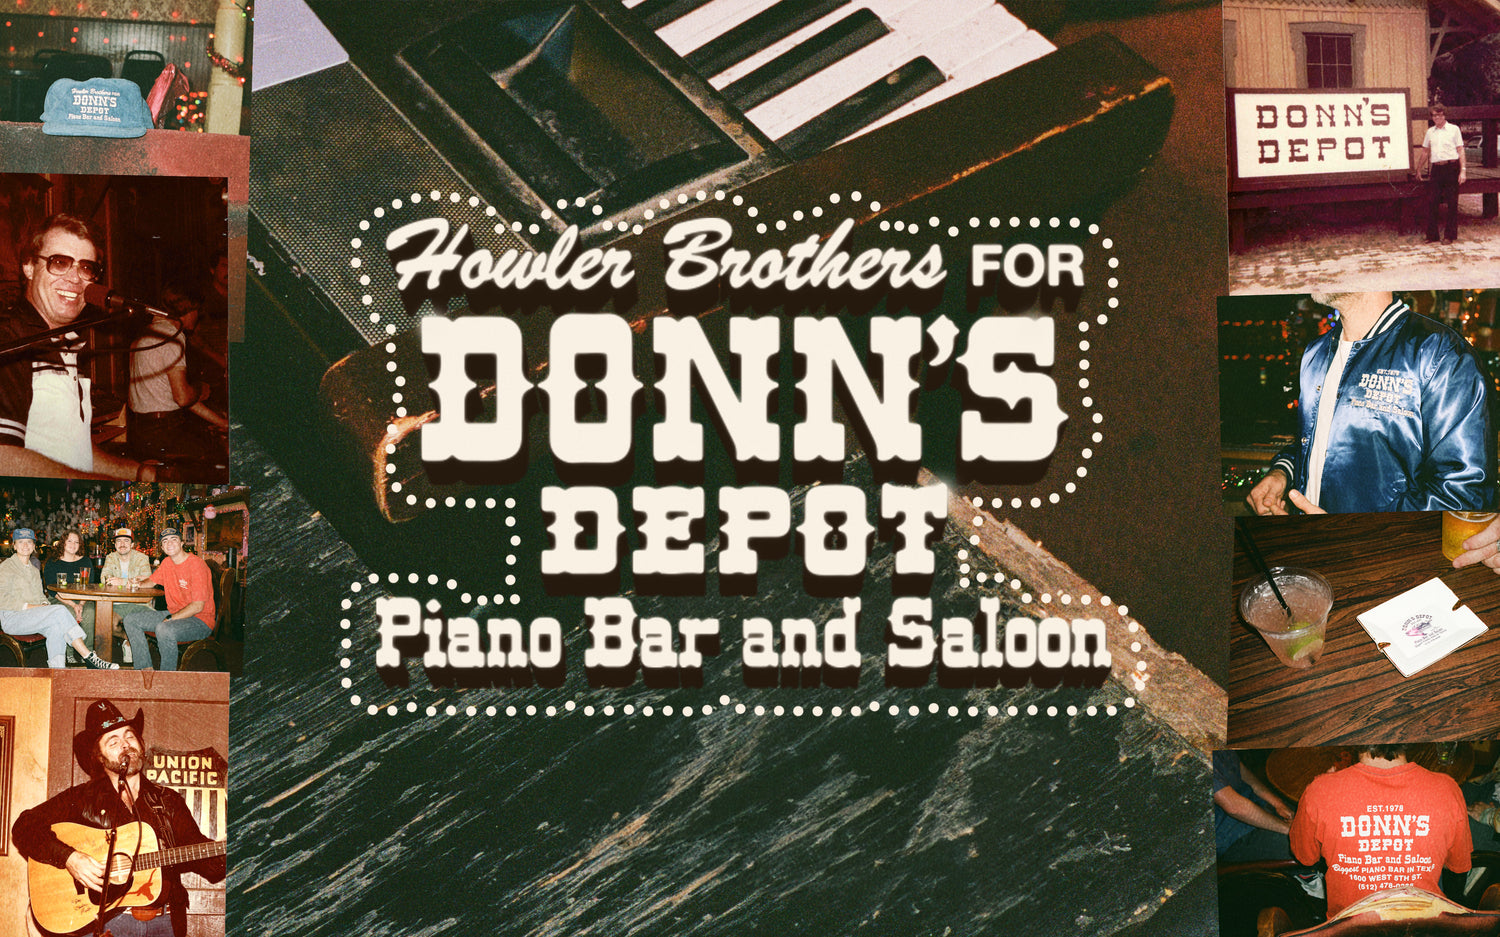 Donn's Depot by Howler Brothers